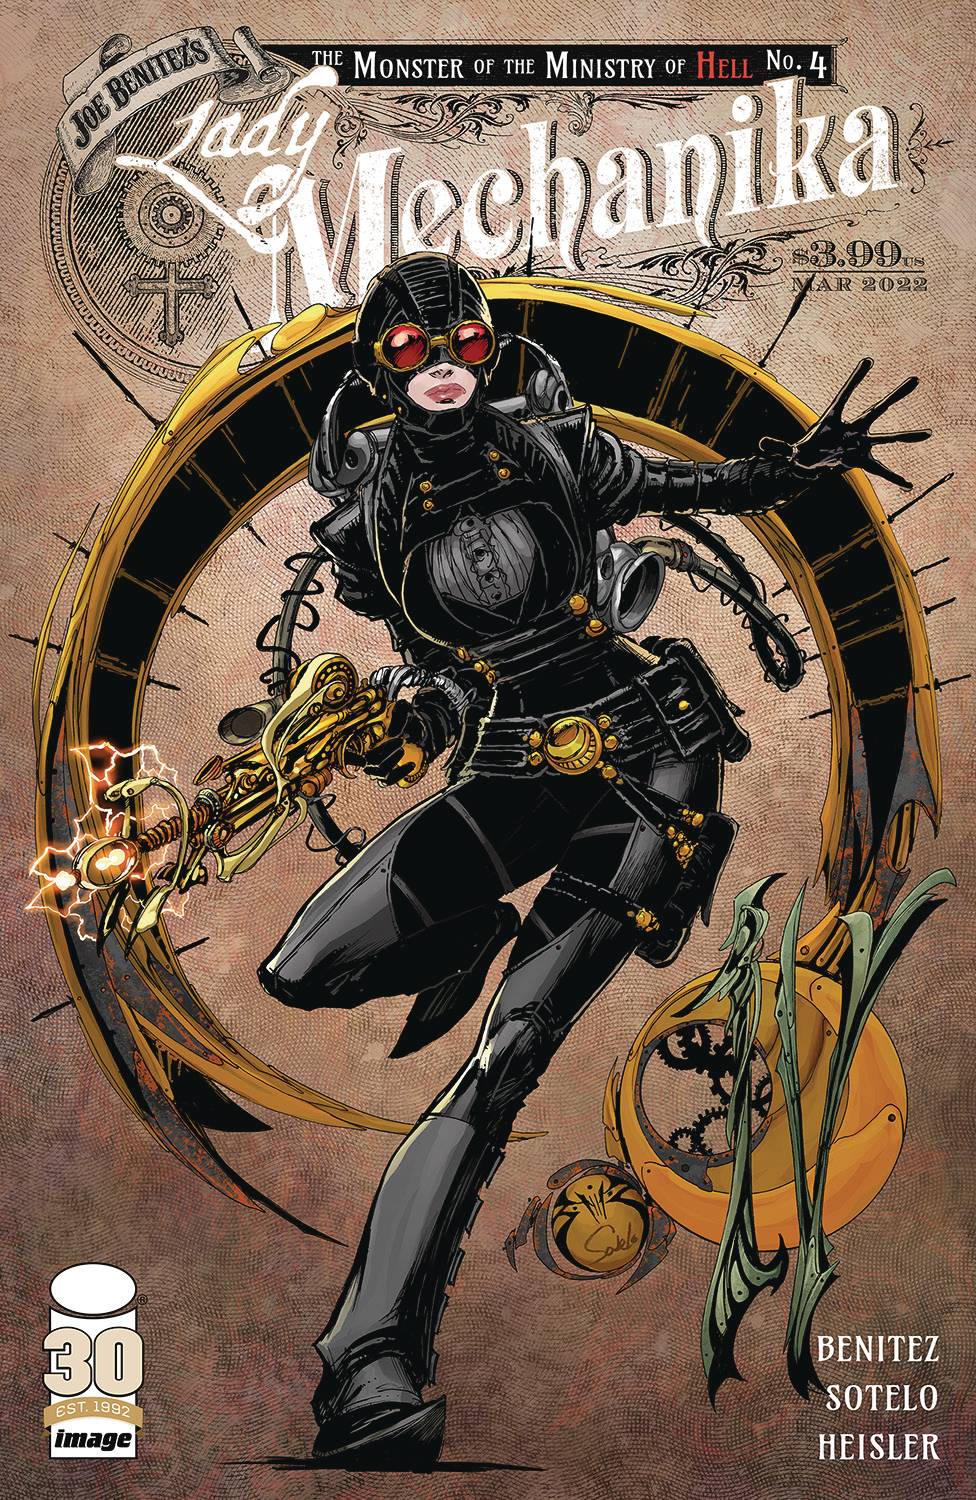 LADY MECHANIKA MONSTER OF MINISTRY OF HELL #4 (OF 4) CVR A